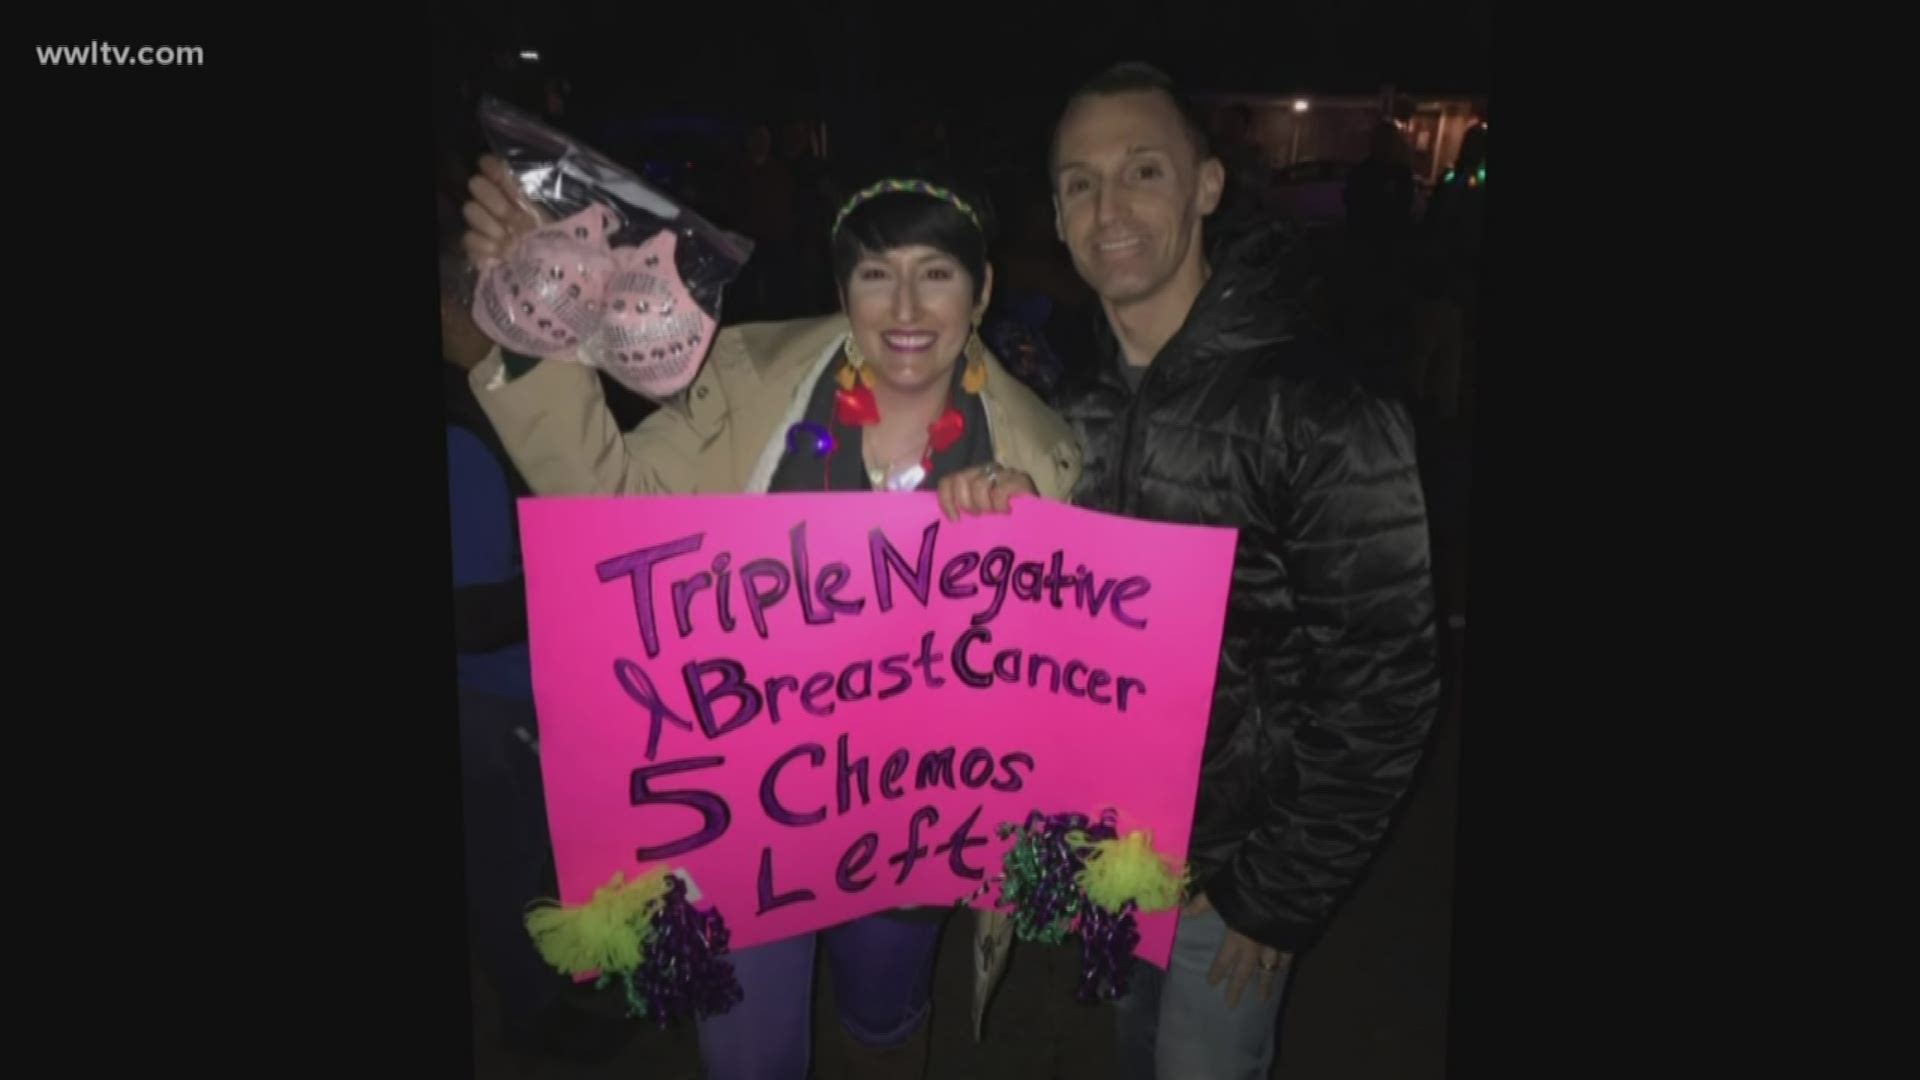 More than a throw: Krewe of Isis bras inspire breast cancer